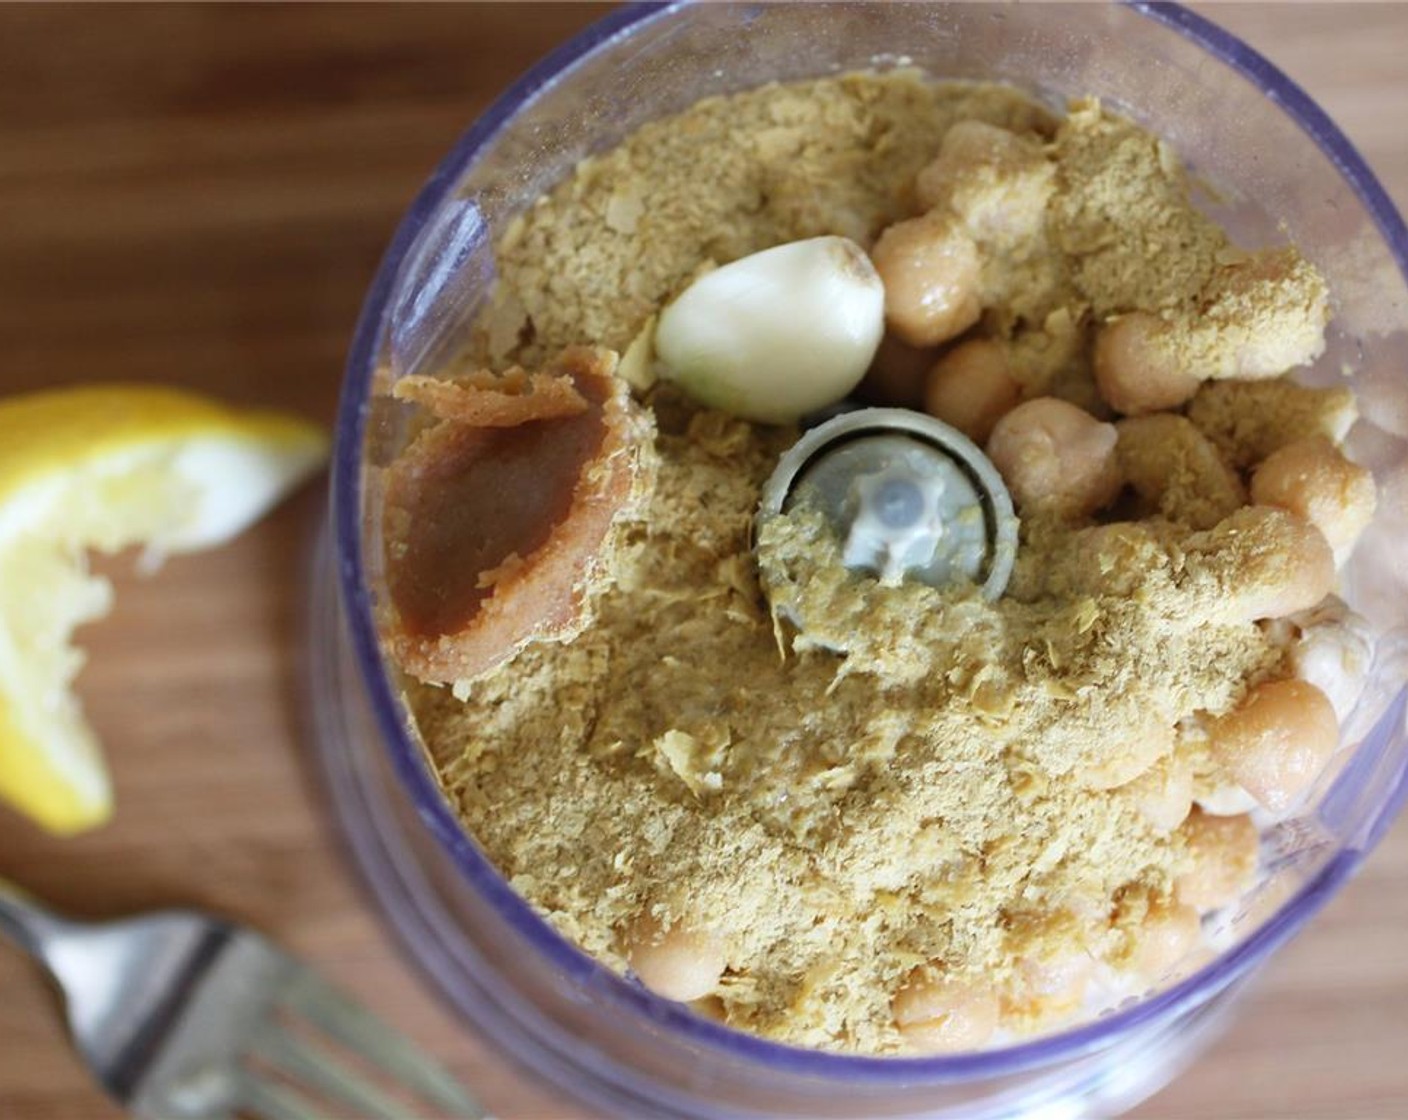 step 3 Combine the soaked Cashew Nuts,Lemon (1/4), Garlic (1 clove), Canned Chickpeas (1/3 cup), Nutritional Yeast (1/4 cup), and White Miso Paste (1/2 Tbsp) in a food processor.